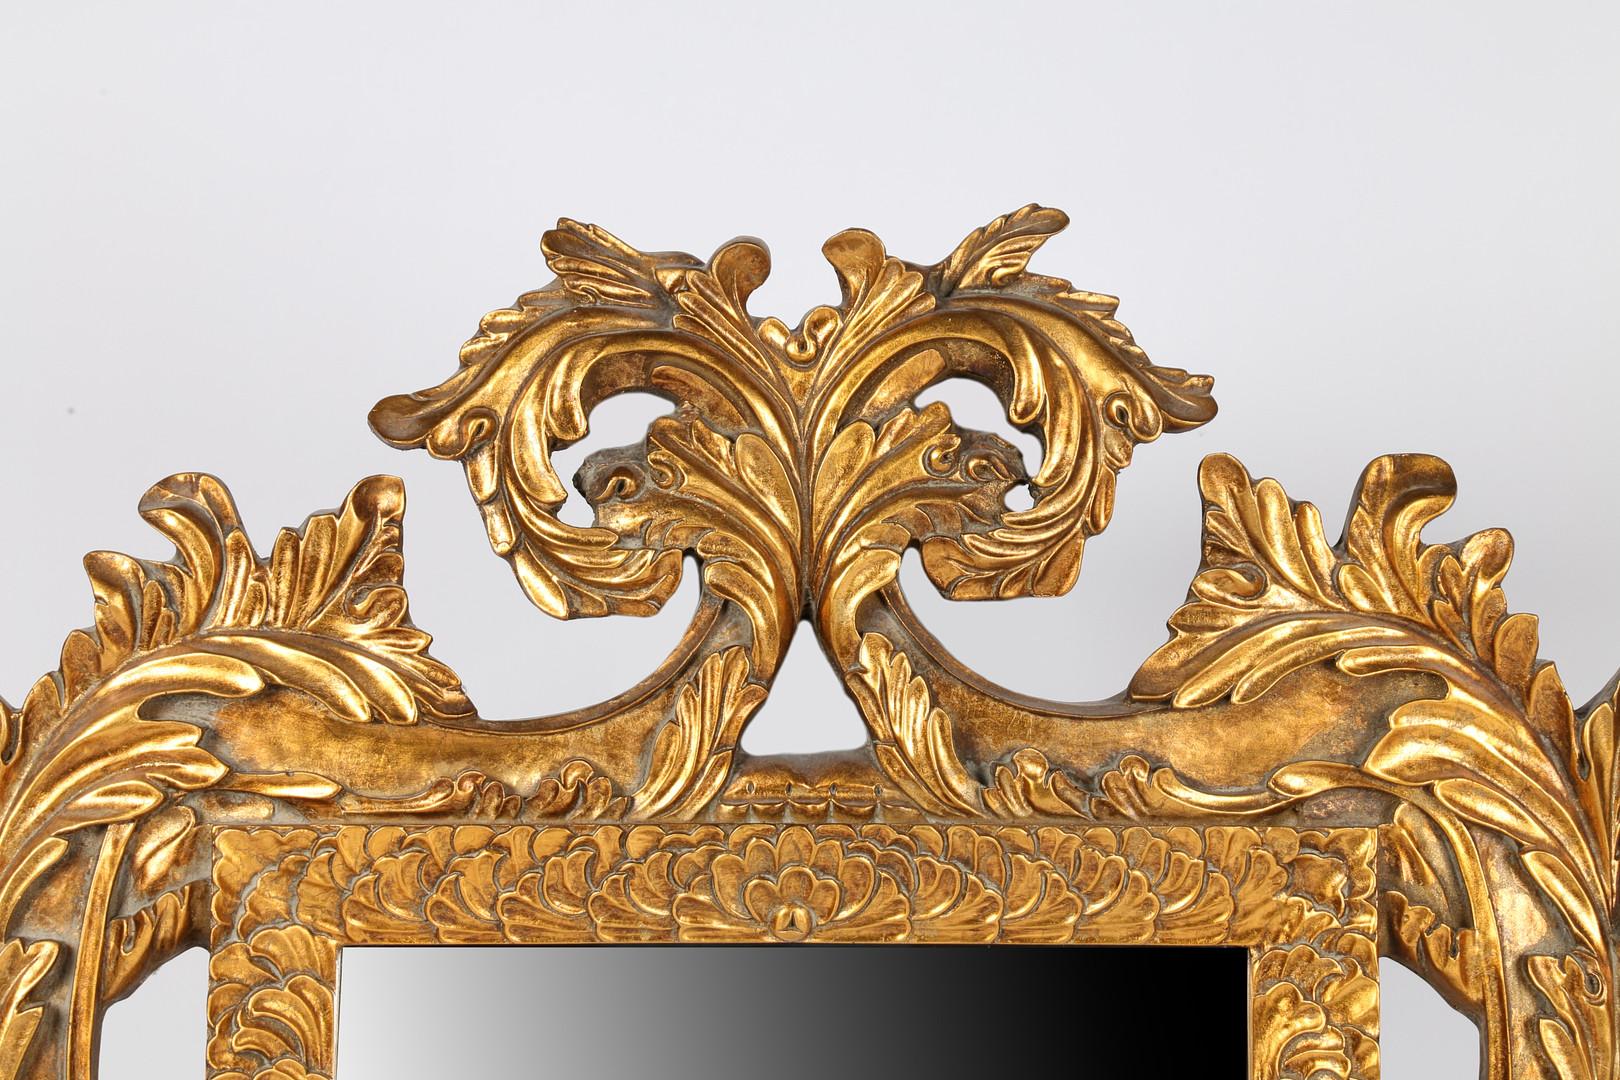 Brushed Gilt Luxury Wall Mirror, Rare Large Antique Rococo English Floral Console Mirror For Sale